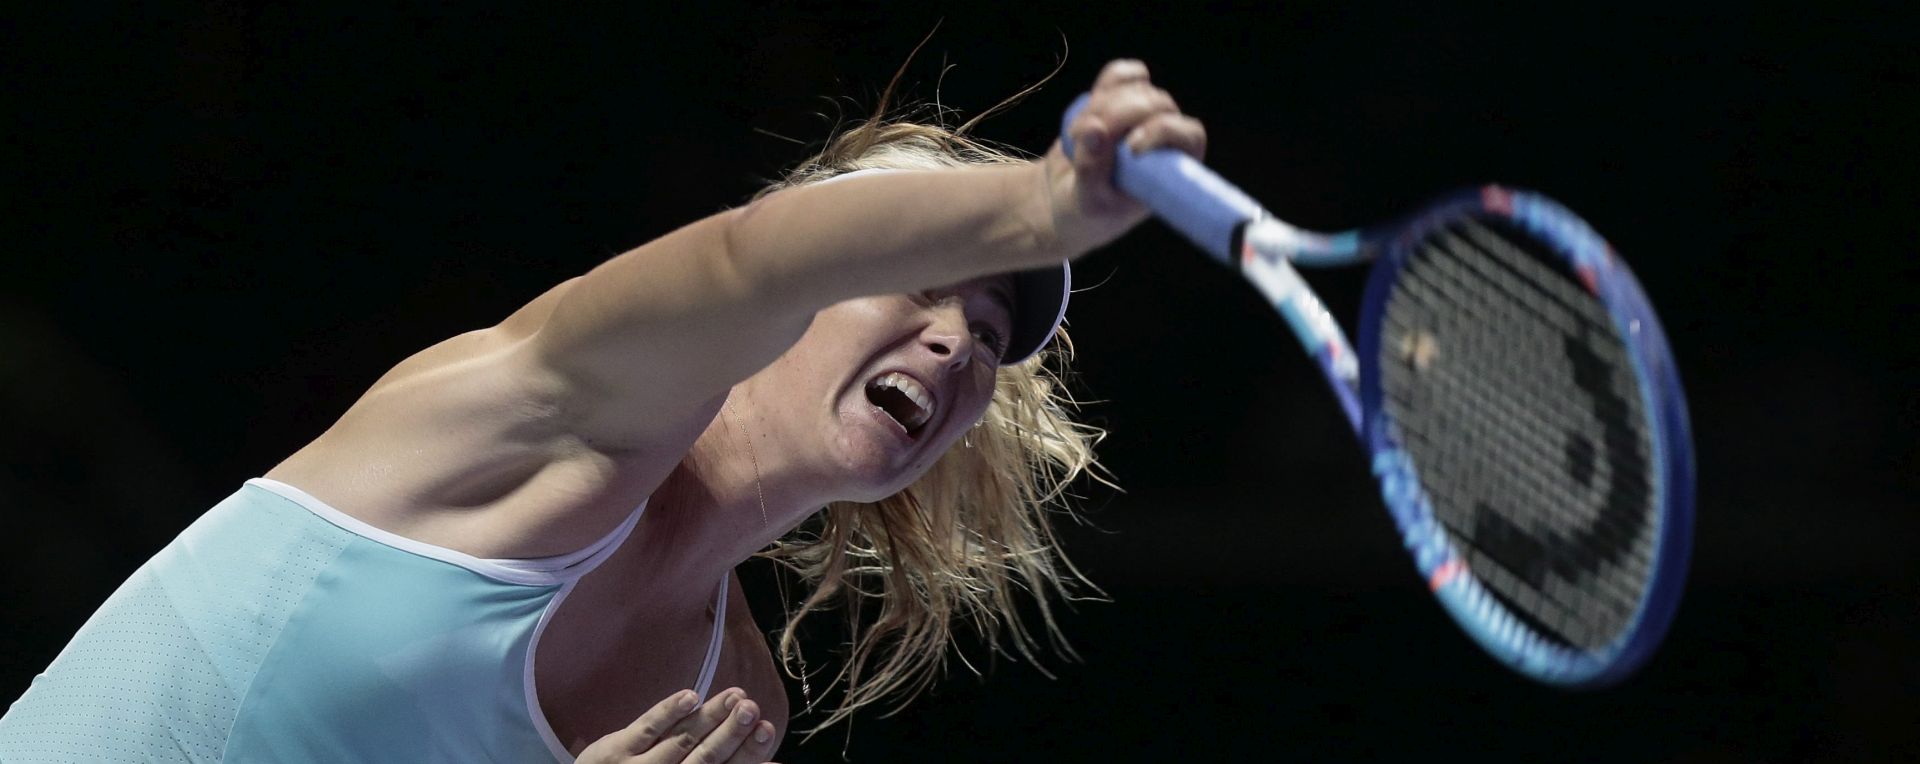 epa05001938 Maria Sharapova of Russia in action against Flavia Pennetta of Italy during their singles round robin stage match of the BNP Paribas WTA Finals 2015 held at the indoor stadium in Singapore, 29 October 2015.  EPA/WALLACE WOON